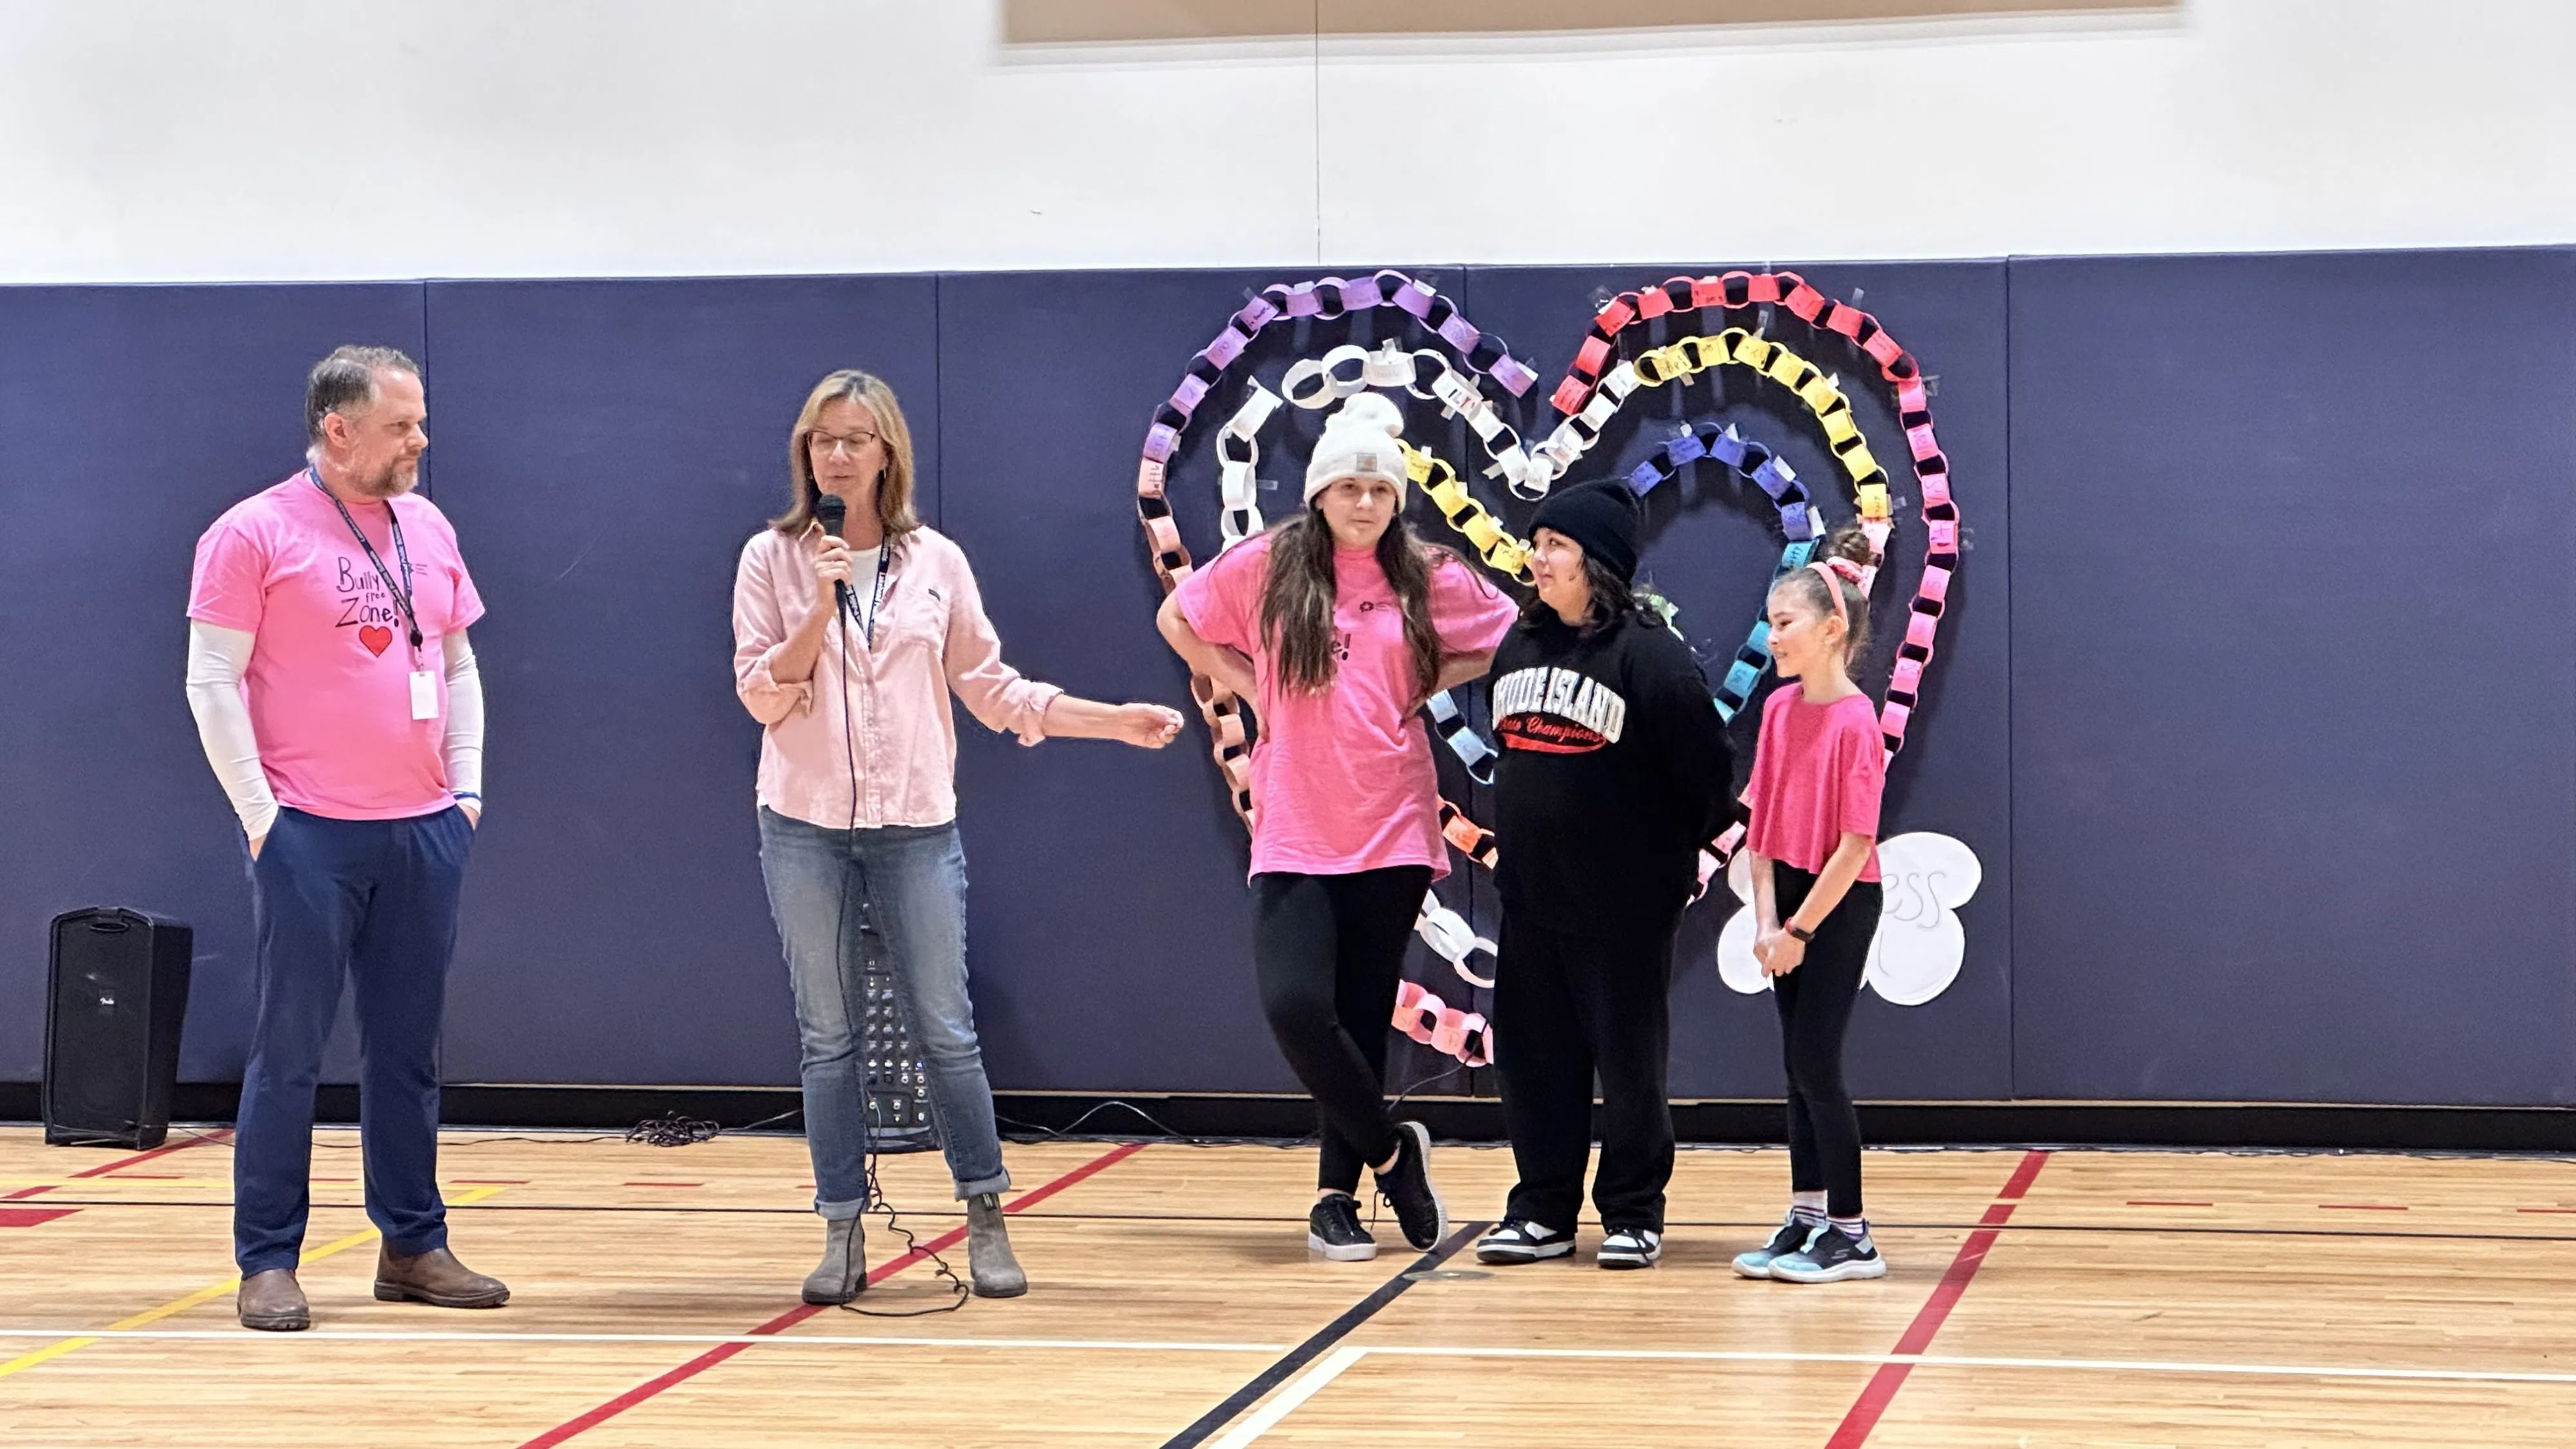 Schools celebrating kindness and anti-bullying on Pink Shirt Day